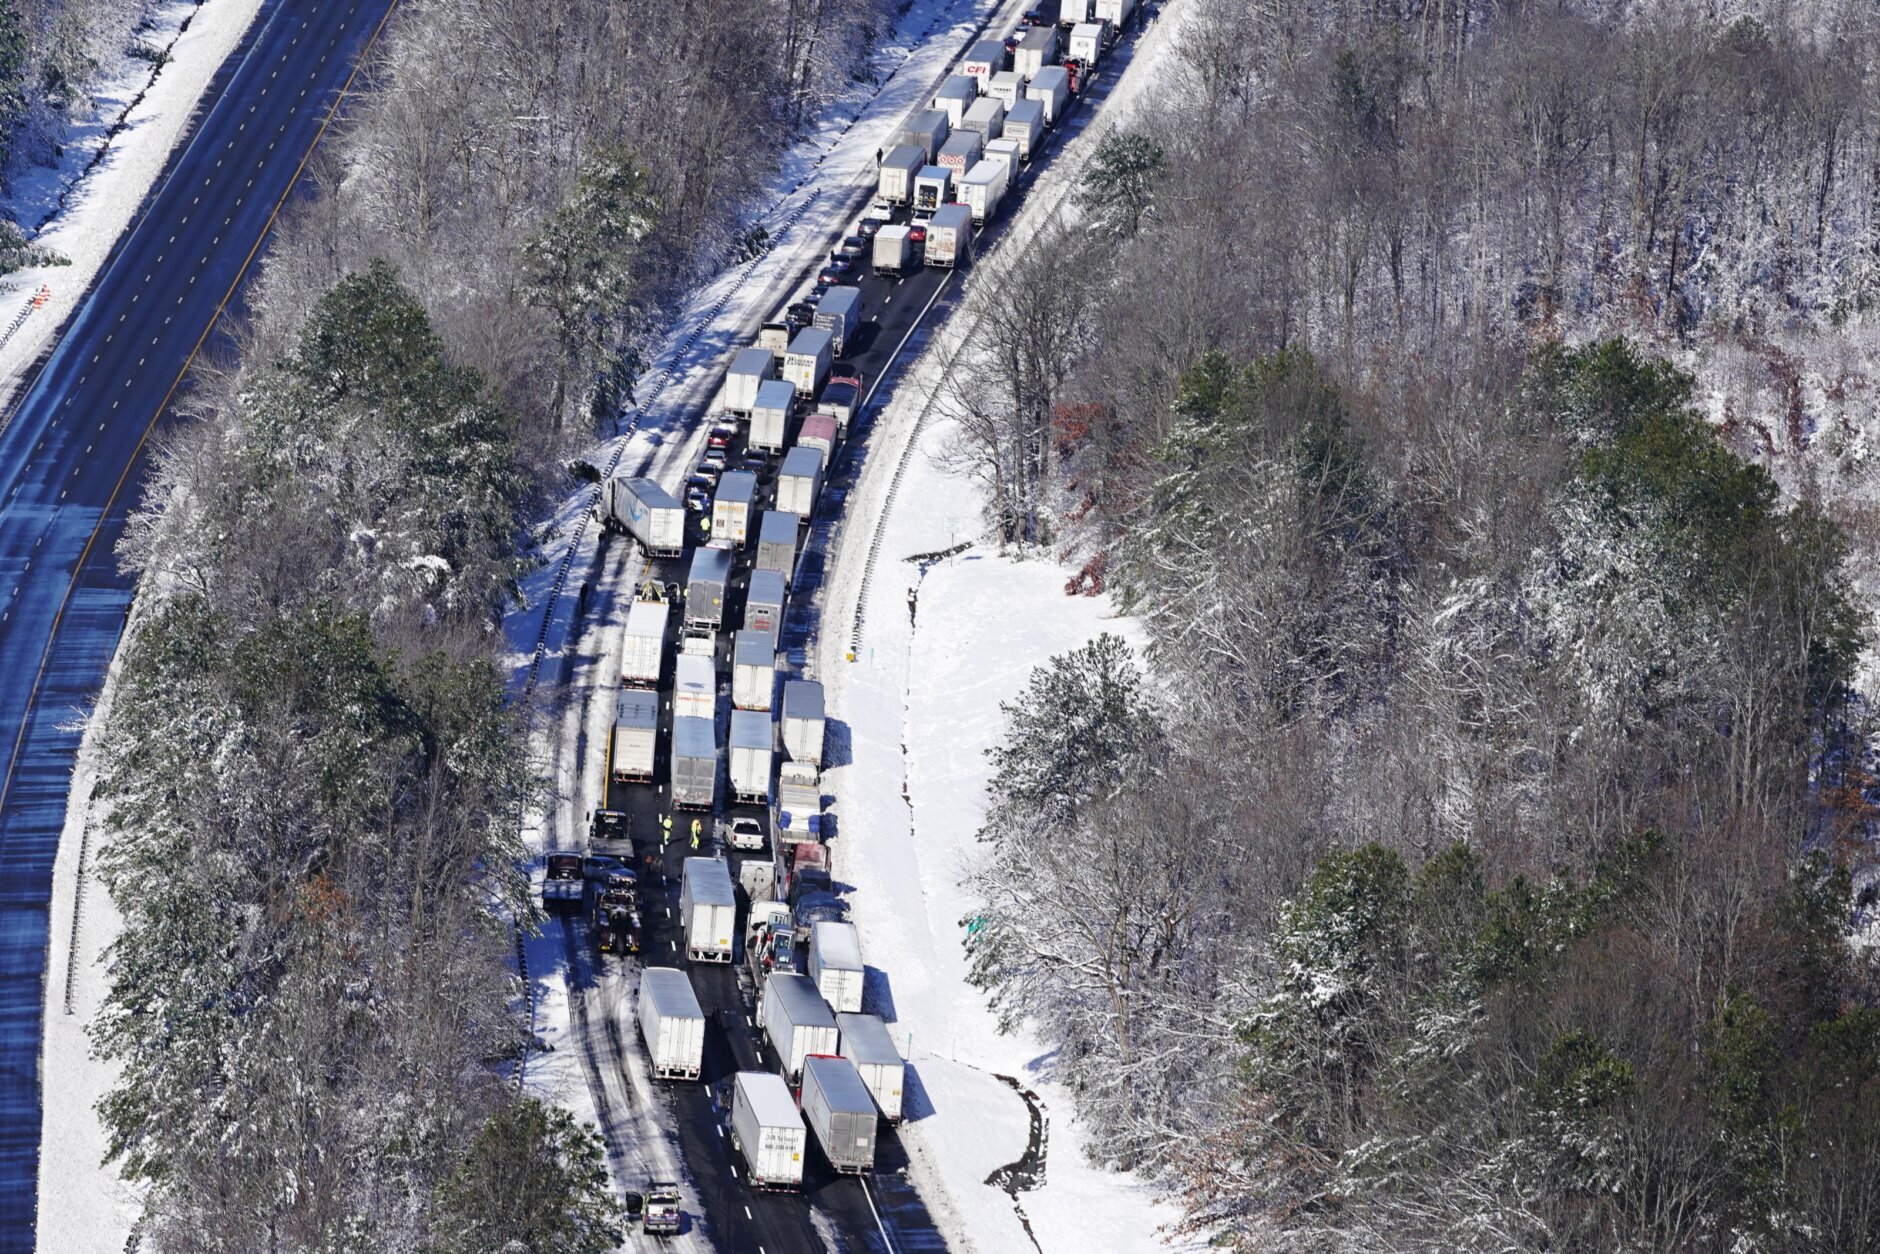 <h3>Blindsided and snow-bound on I-95</h3>
<p>The most fateful weather event of 2022 will be remembered not for its meteorological ranking but for its disastrous impact on traffic.</p>
<p>A well-forecast snowstorm on Jan. 3 produced a broad swath of foot-deep snow across Stafford County, Spotsylvania County and Fredericksburg in Virginia. About half a foot fell near the Capital Beltway, with lesser amounts to the north. It was the kind of winter storm that passes through the area once every three to five years.</p>
<p>In the face of Winter Storm Warnings, too many people decided to drive that Monday morning and many of them incurred hours-long traffic delays. Traffic seized on the snow-covered Beltway near the Woodrow Wilson Bridge. Some drivers idled on Route 50 near Annapolis, Maryland, for more than four hours.</p>
<p>The words &#8220;disaster&#8221; and &#8220;nightmare&#8221; are often inappropriately used describe to commonplace traffic backups, but the agony and potentially life-threatening conditions that drivers endured on Jan. 3 and 4 were truly nightmarish south of Washington.</p>
<p>On Interstate 95 in northern Virginia, a volatile combination of heavy New Year&#8217;s weekend traffic and extreme snowfall rates led to one of the worst traffic disasters in recent history. One by one, drivers of big trucks and small cars began losing traction and blocking lanes.</p>
<p>Snow, falling at rates exceeding two inches per hour, rapidly piled up between large clusters of disabled vehicles, with long segments of the highway becoming impassable between Thornburg and Garrisonville.</p>
<p>The result was unprecedented — far worse than even the harrowing traffic tales told after notorious snowstorms on Jan. 26, 2011 and March 9, 1999. Some drivers and passengers were <a href="https://wtop.com/traffic/2022/01/the-storm-paralyzed-traffic-on-some-roads/">marooned on I-95</a> for more than 24 hours, forced to spend the night on the dark highway without food, water or a bathroom. A 40 mile segment of I-95 was closed for nearly two days for the removal of disabled vehicles and ice.</p>
<p>The Virginia Department of Emergency Management, Virginia Department of Transportation and the Virginia State Police were criticized for their delayed response, poor coordination and &#8220;broader lack of situational awareness&#8221; in an <a href="https://wtop.com/virginia/2022/04/report-details-virginias-response-to-january-snow-storm-gridlock/">after-action report</a>. Virginia’s inspector general revealed additional glaring missteps in a <a href="https://wtop.com/virginia/2022/08/new-virginia-ig-audit-on-what-went-wrong-during-i-95-snowstorm-gridlock/">29-page audit</a>.</p>
<p>The shortcomings in the Commonwealth&#8217;s response exacerbated the inevitable. In a densely populated area, it is not the blockbuster blizzards but rather <a href="https://wtop.com/dc-transit/2022/01/when-it-comes-to-snow-stunned-traffic-its-all-about-fall-rates-bad-timing-and-poor-judgement/">underestimated snowstorms</a> yielding extreme snowfall rates that so often lead to calamitous travel conditions. If enough discretionary travel is postponed, essential personnel have room to maneuver and travel.</p>
